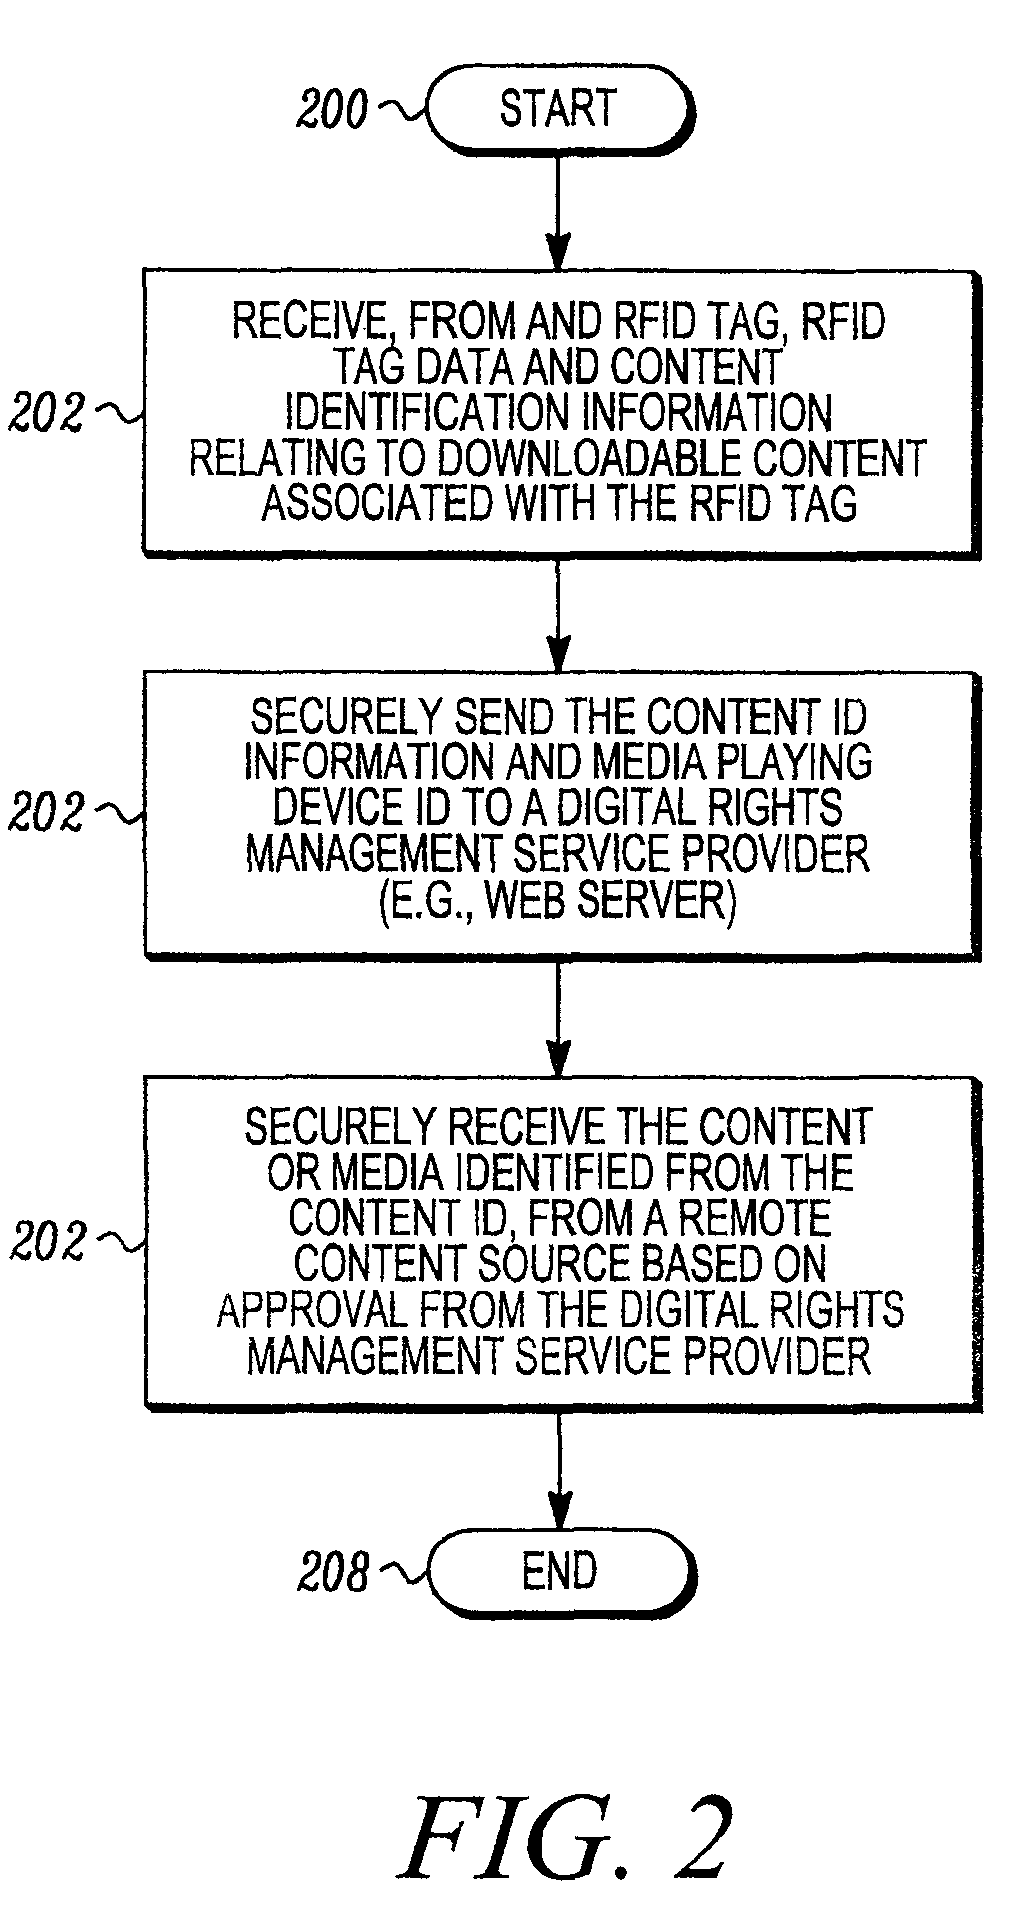 RFID enabled media system and method that provides dynamic downloadable media content